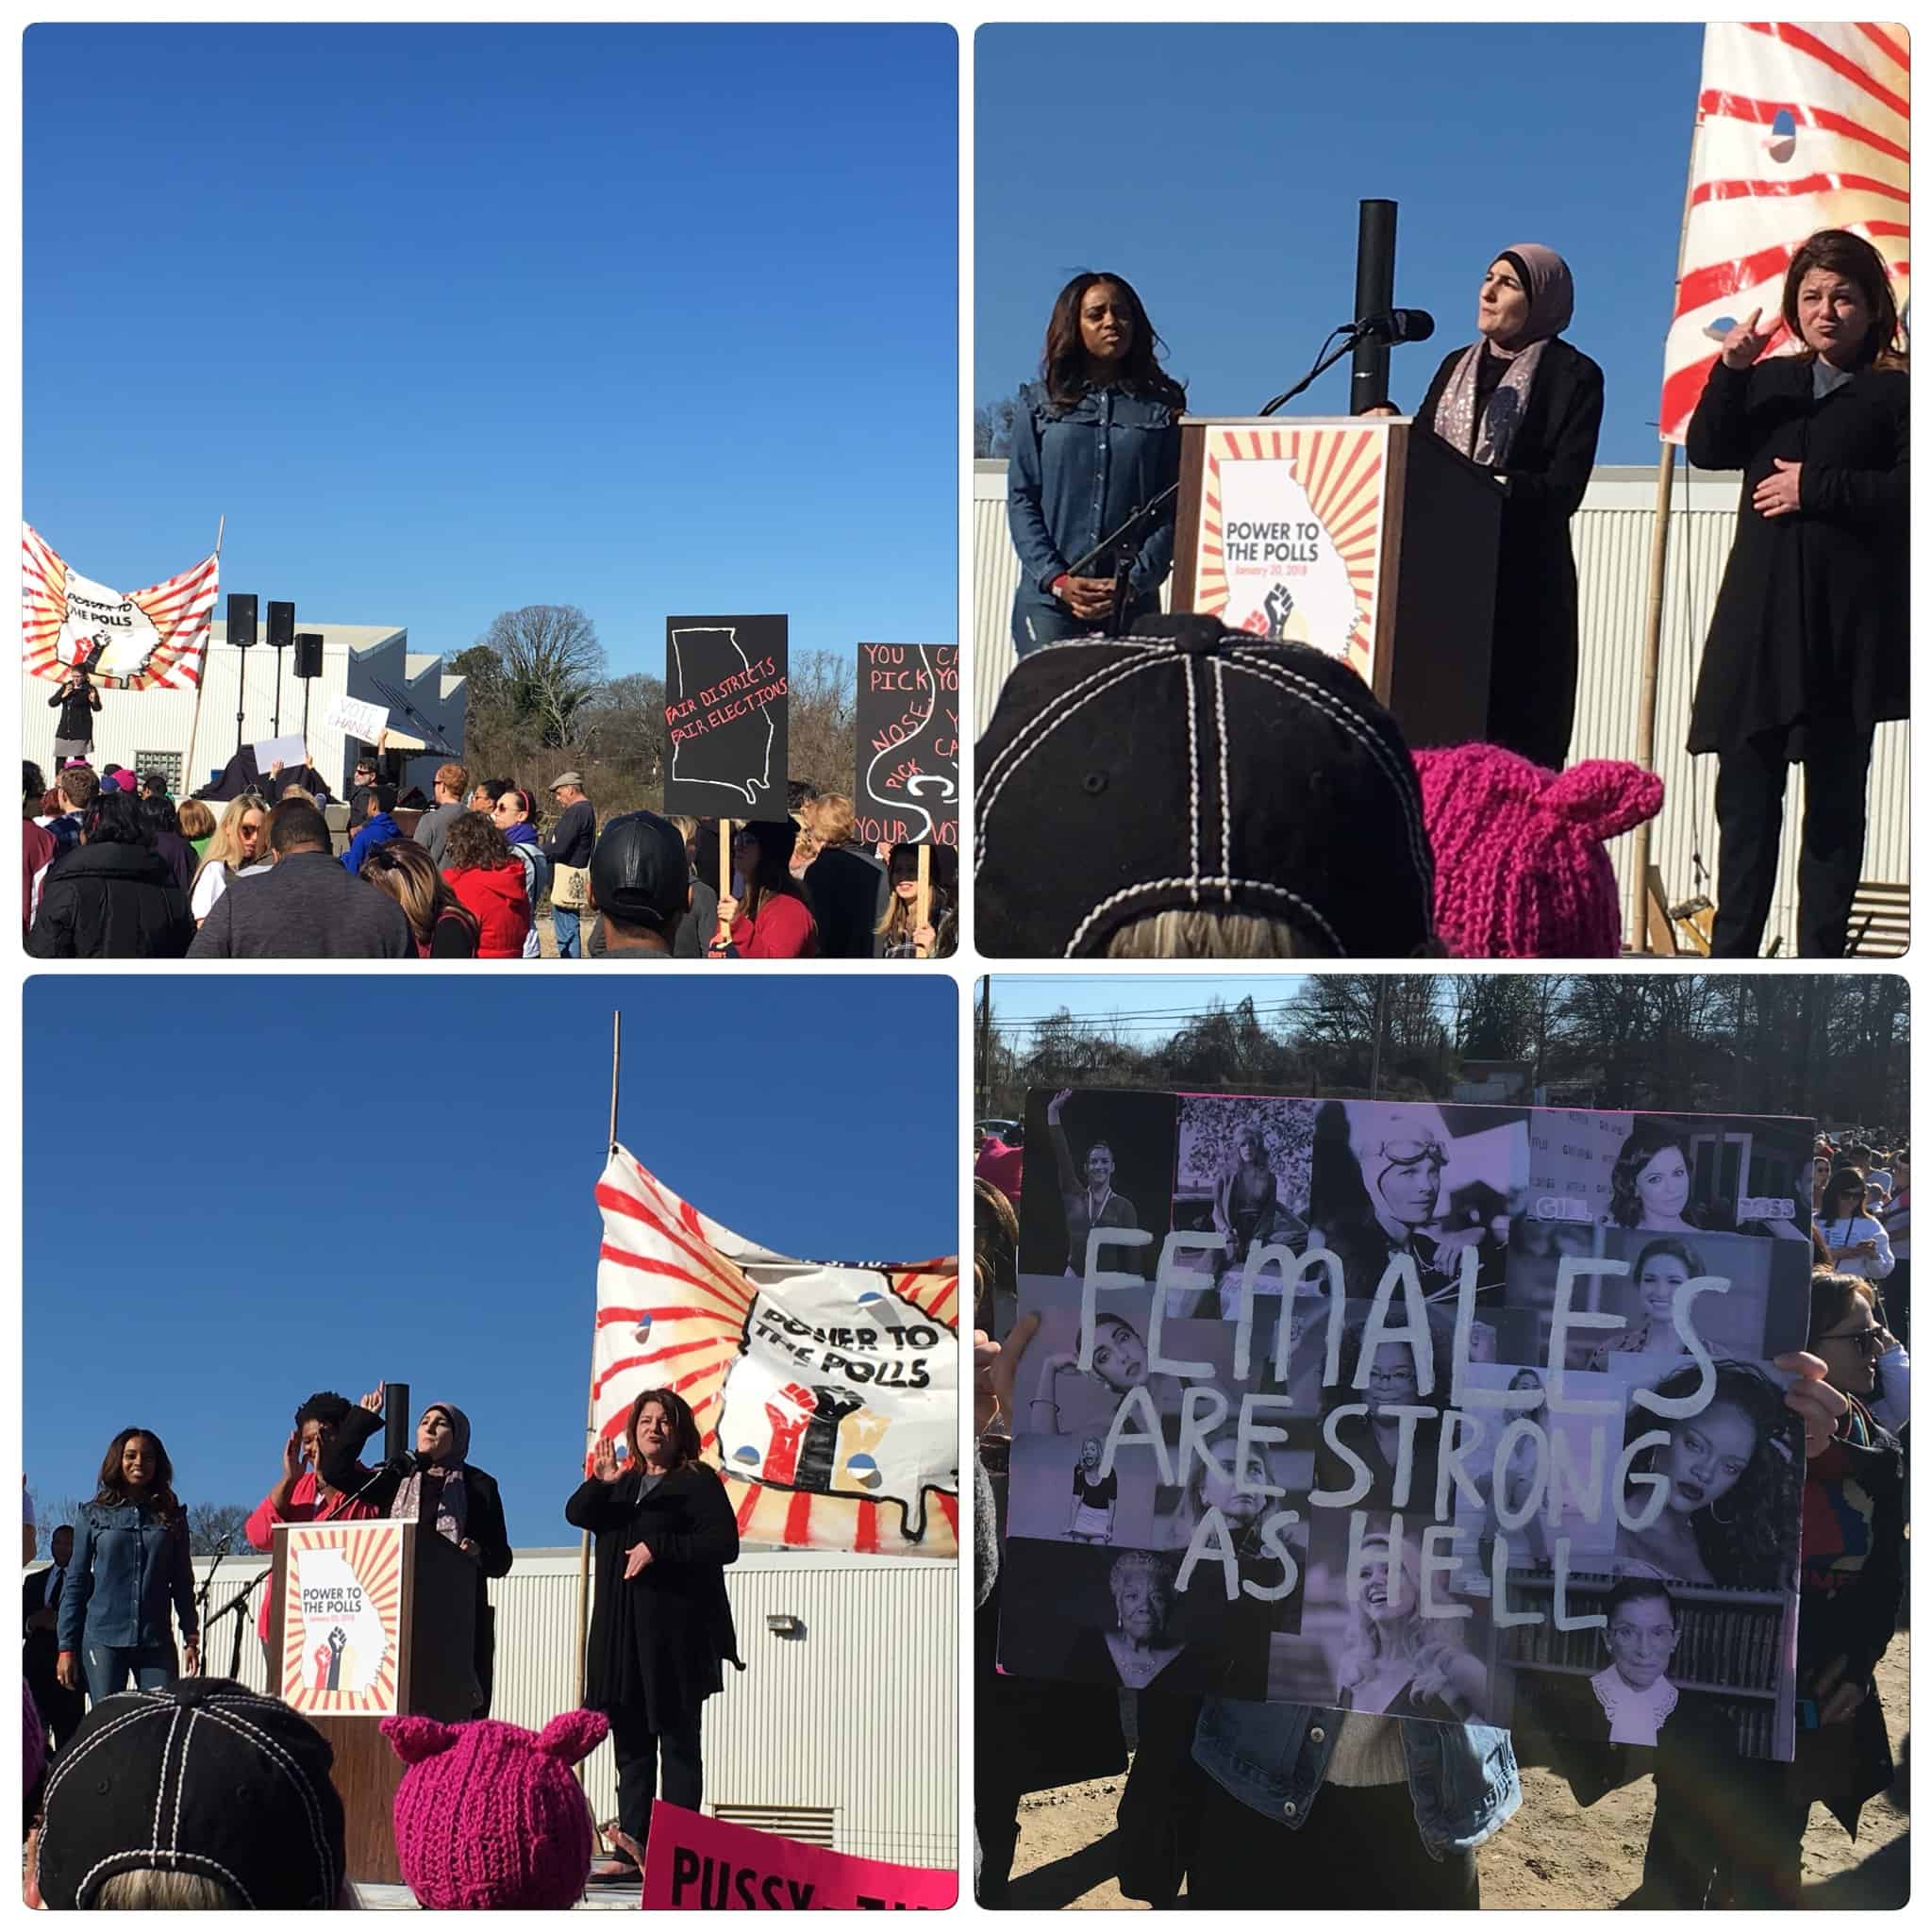 Women’s March/Power To The Polls Ga 2018